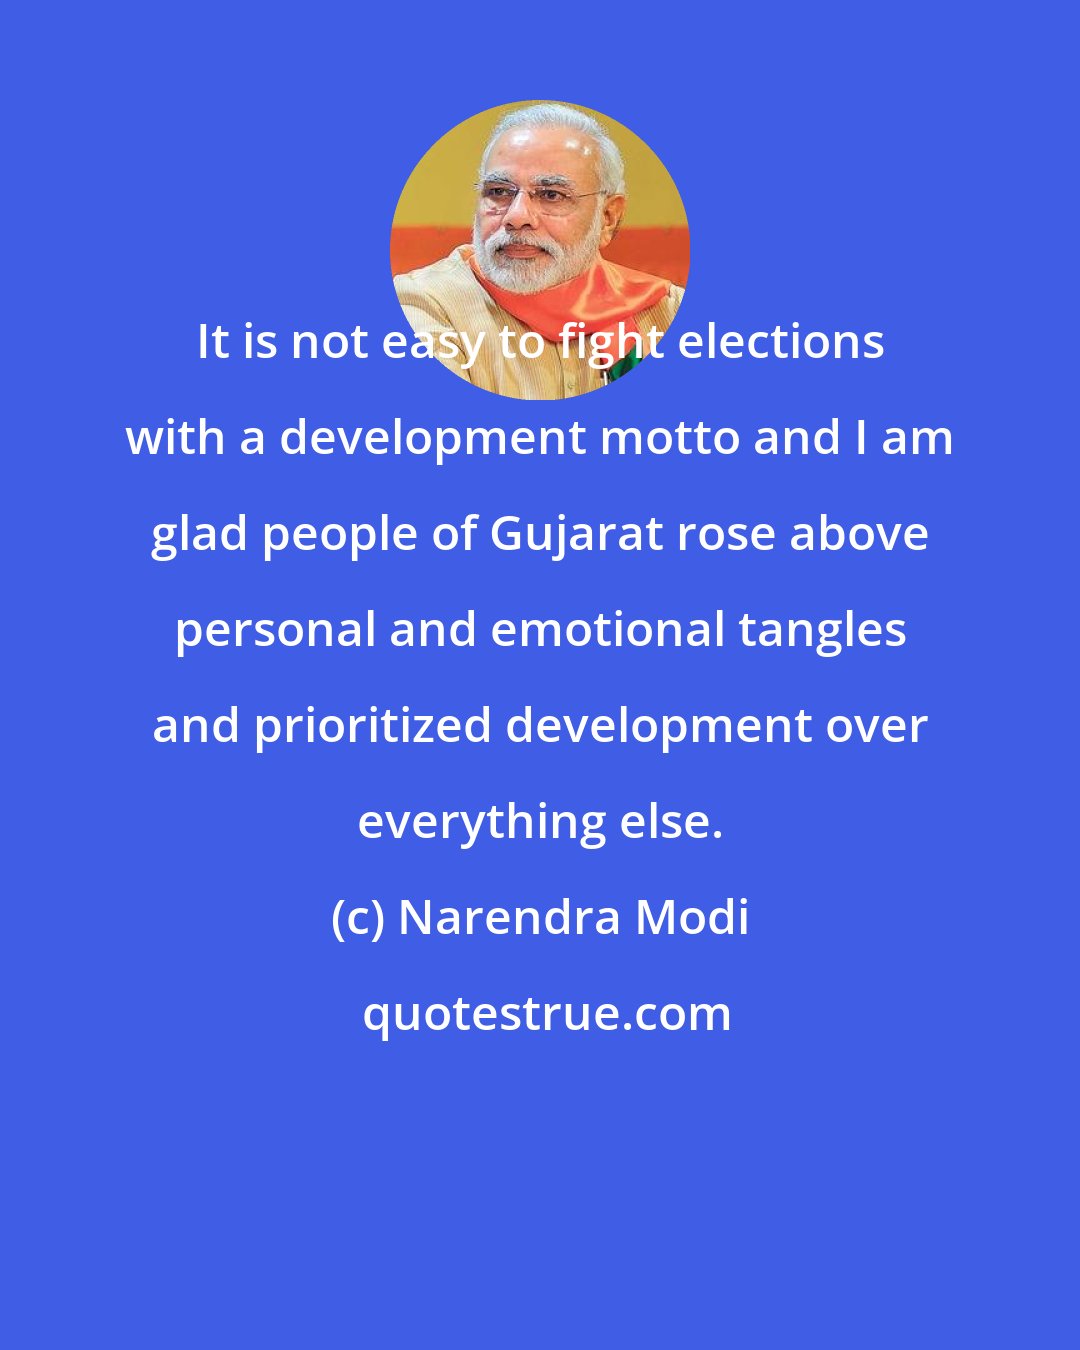 Narendra Modi: It is not easy to fight elections with a development motto and I am glad people of Gujarat rose above personal and emotional tangles and prioritized development over everything else.